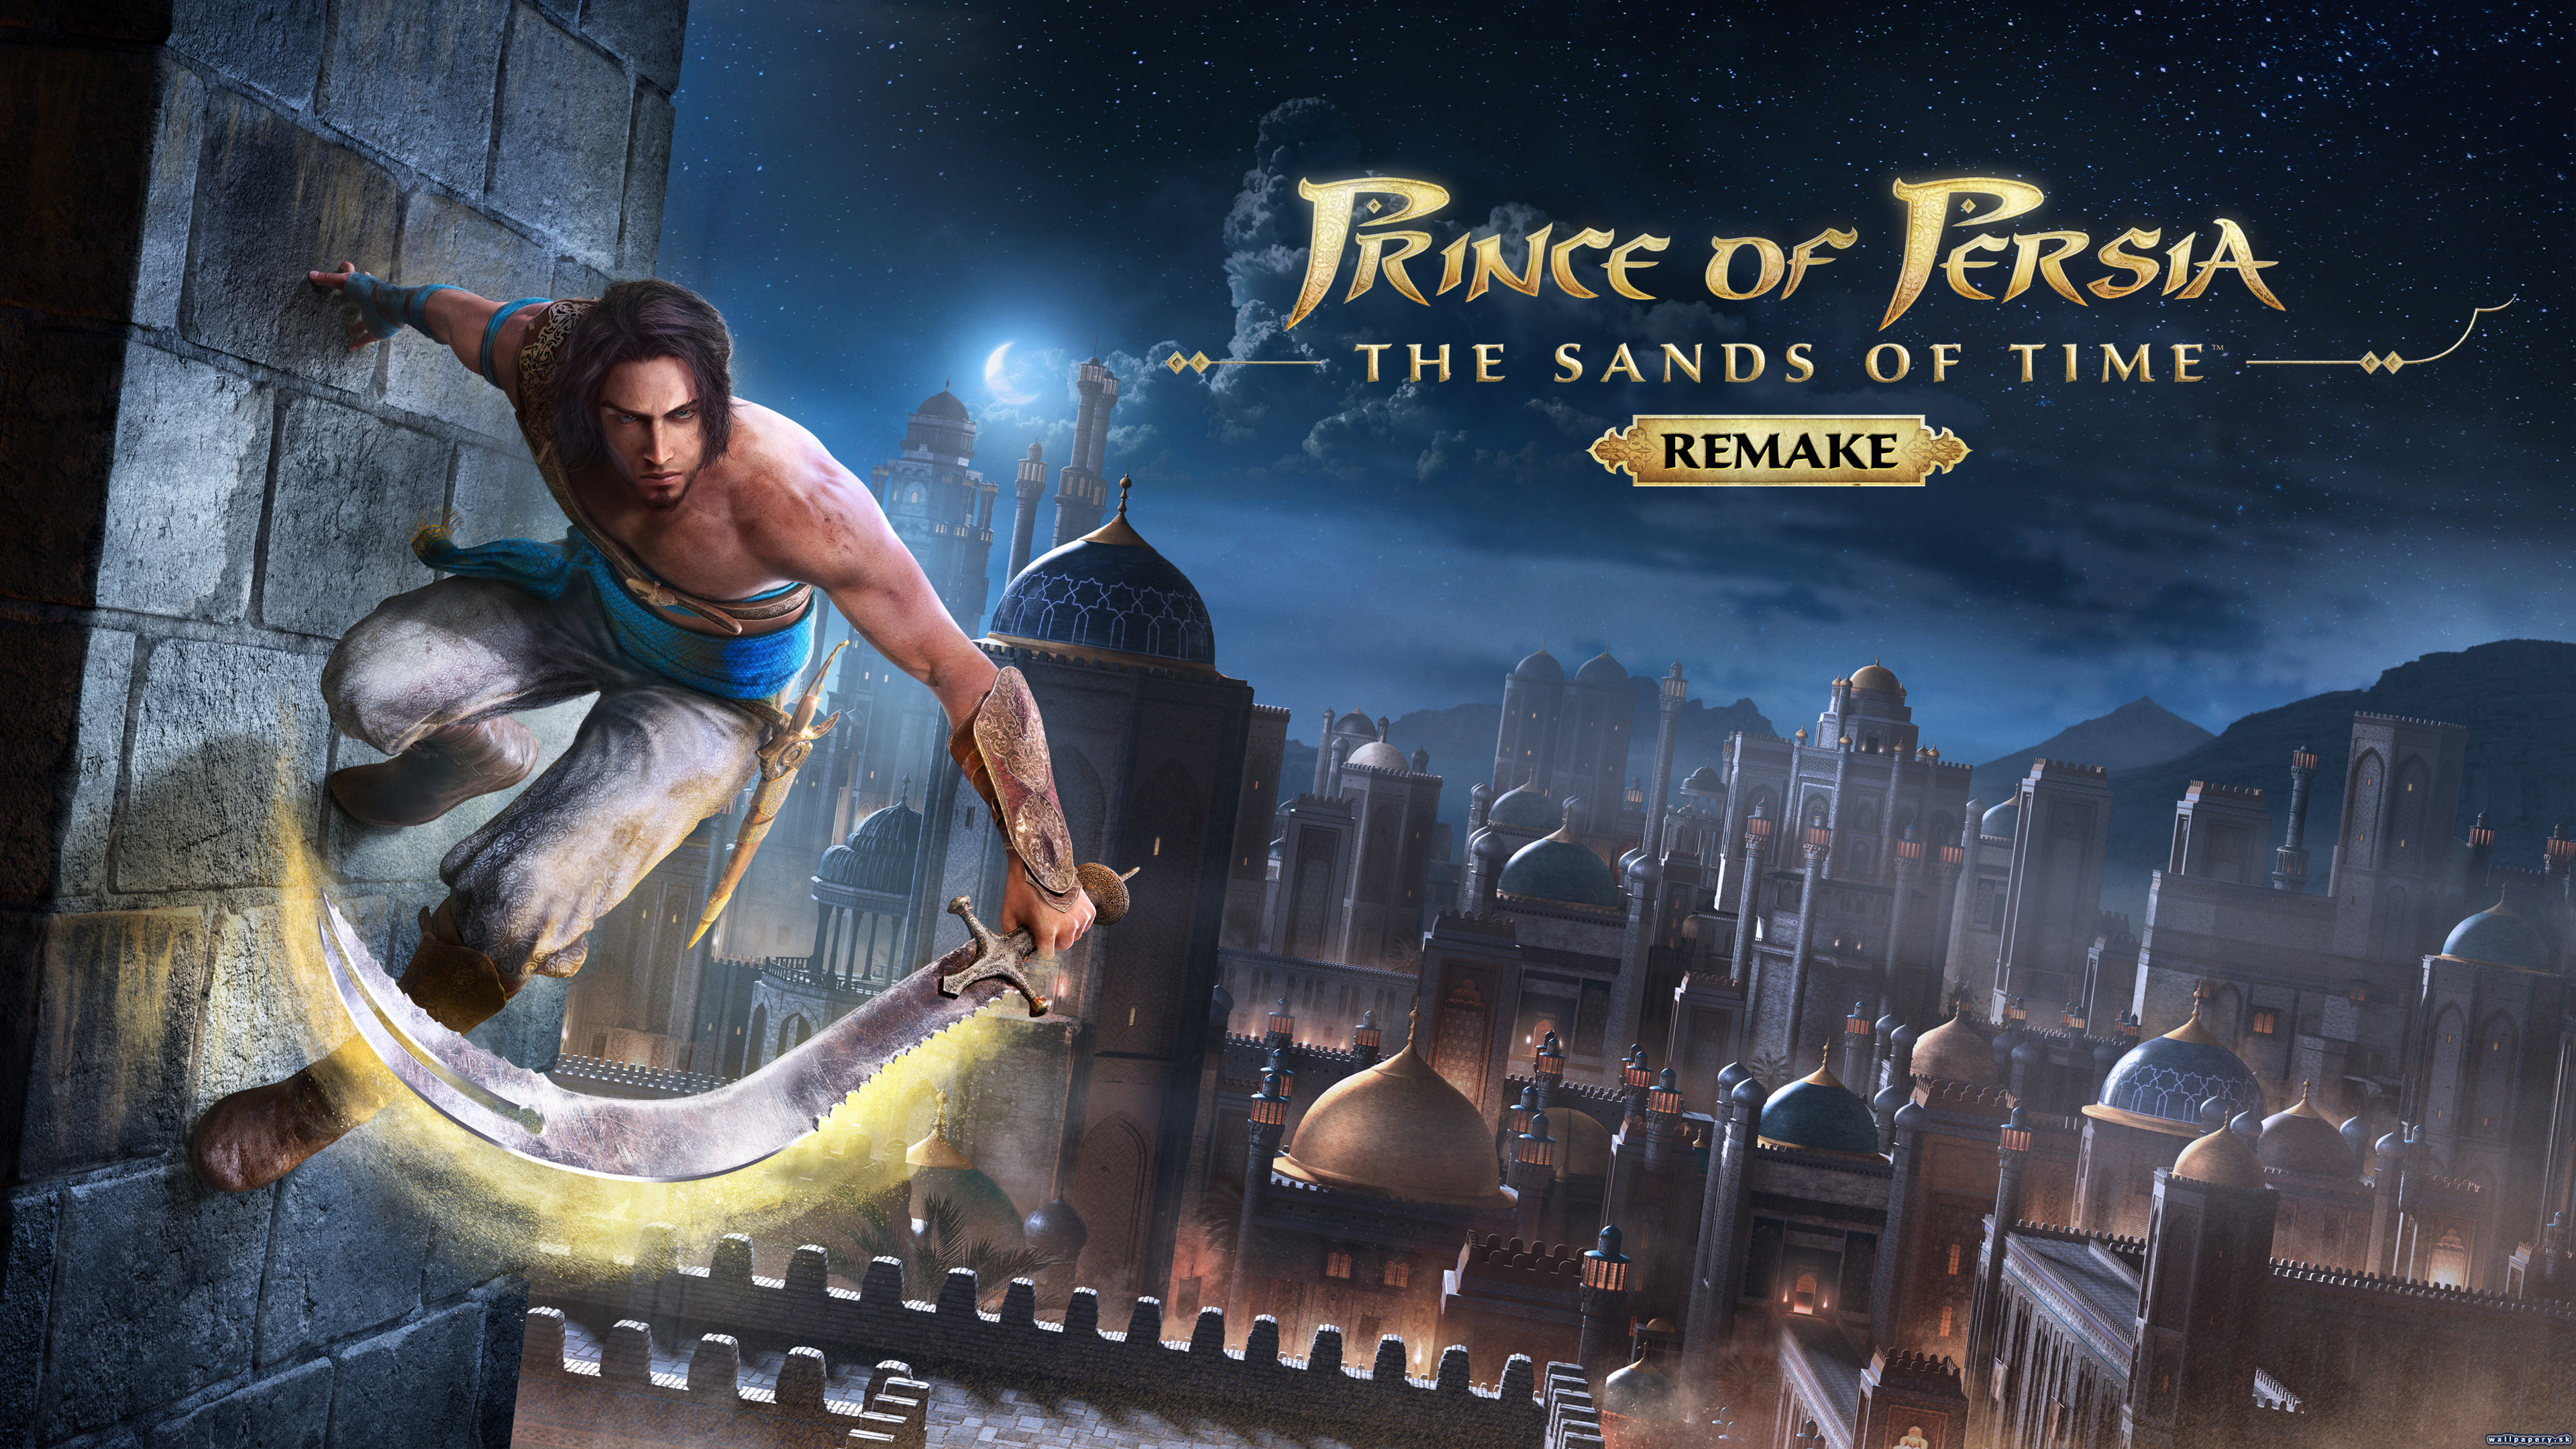 Prince of Persia: The Sands of Time Remake - wallpaper 1